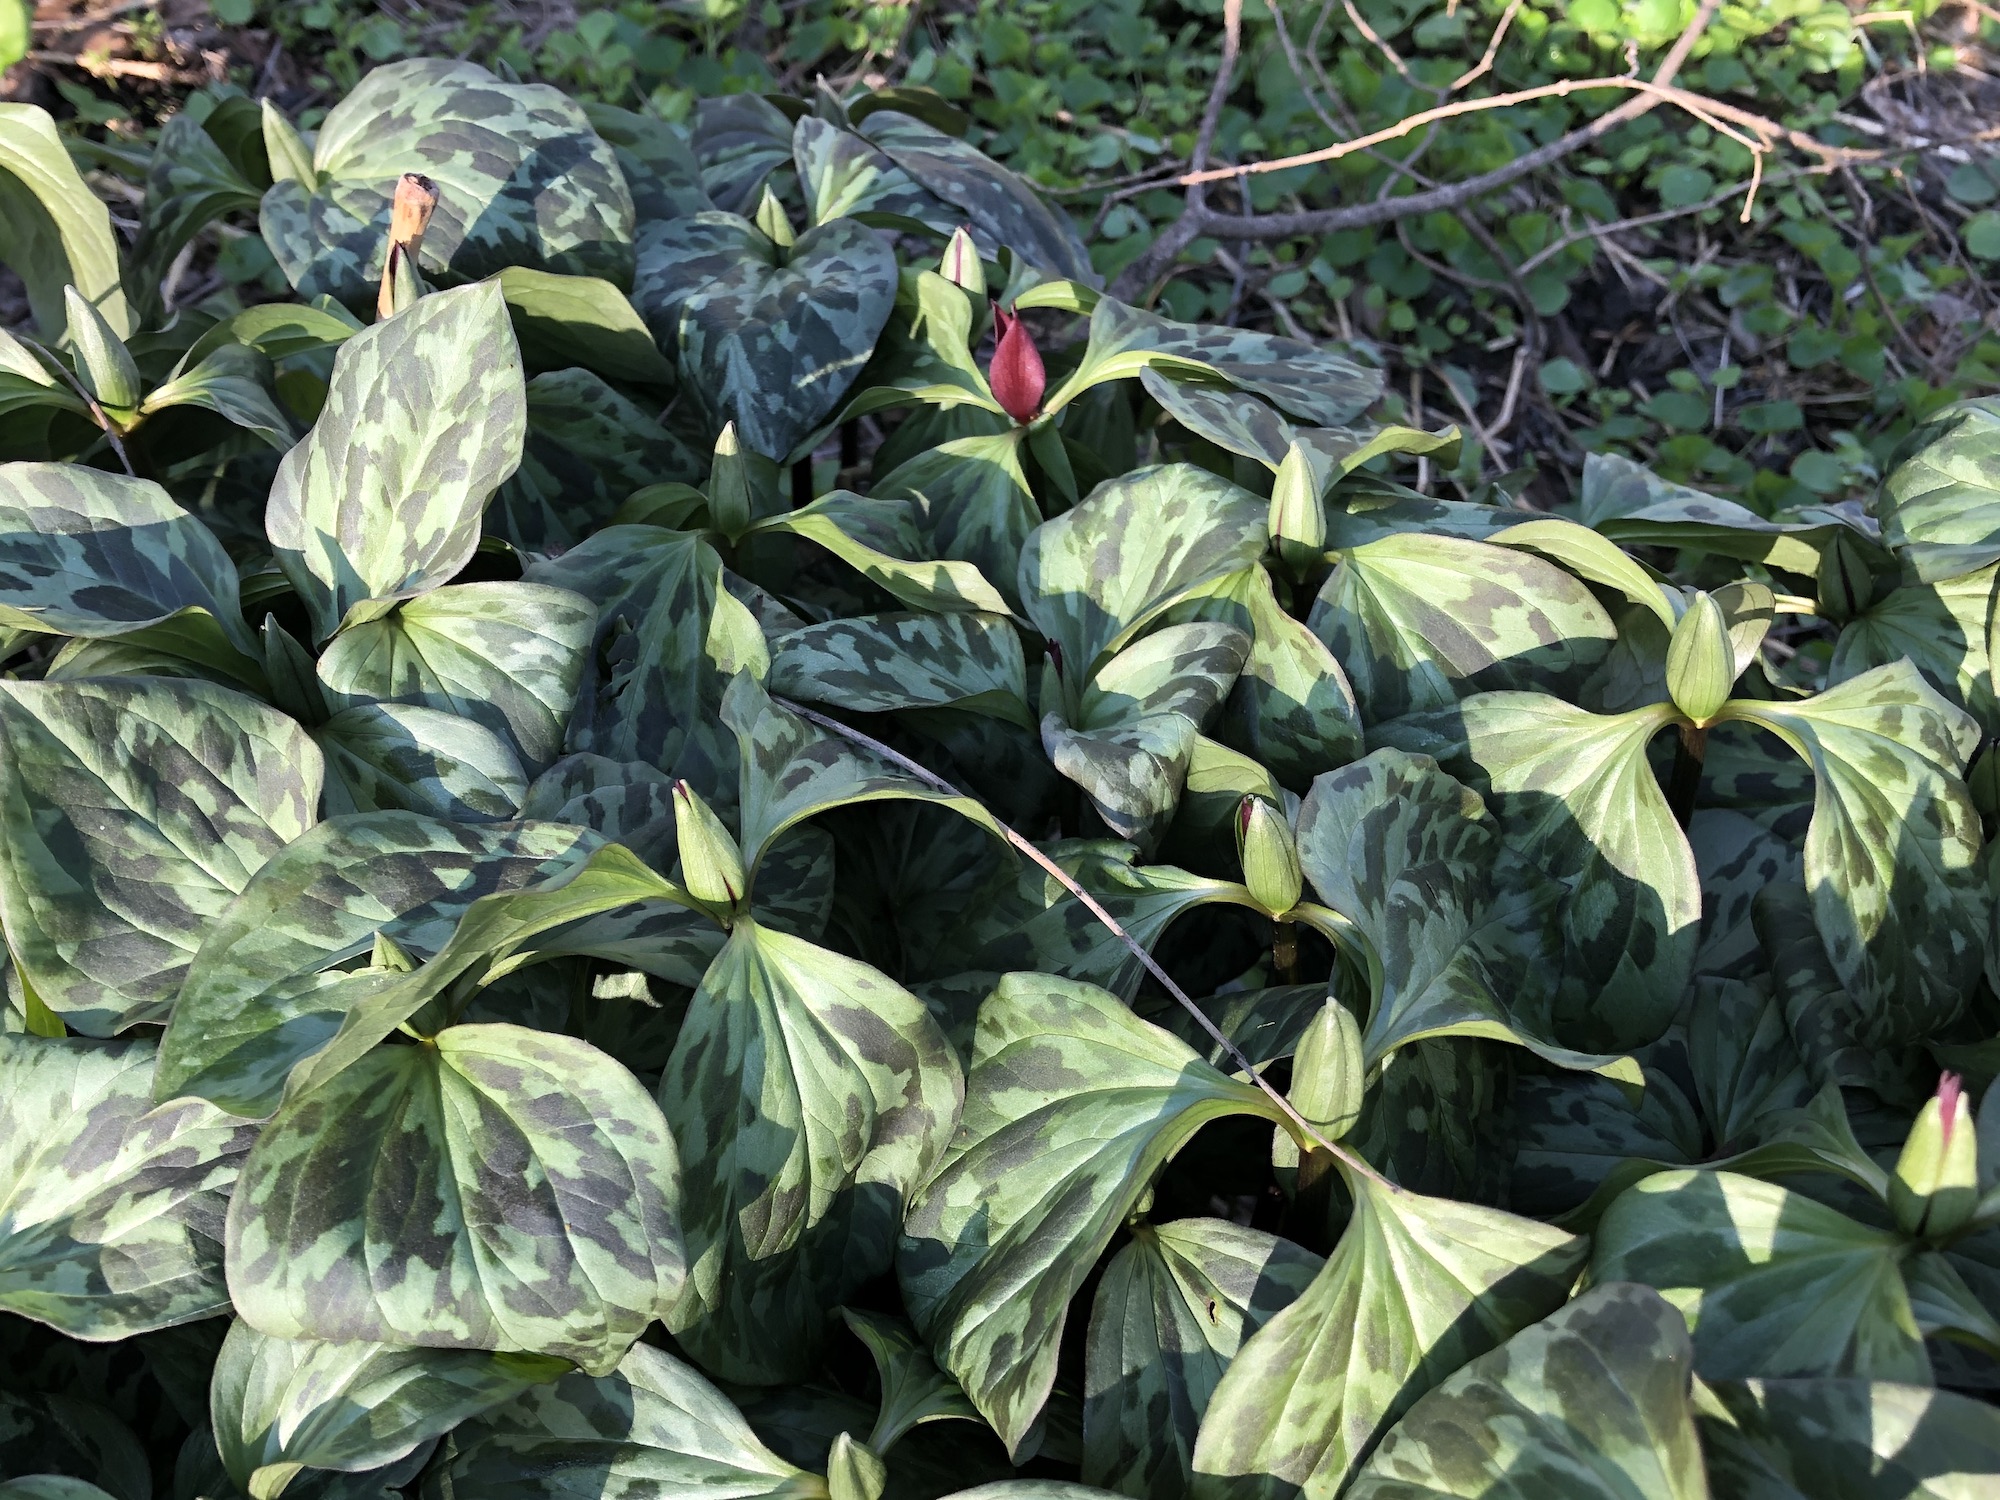 Trillium off of bike path between Marion Dunn and Duck Pond on April 25, 2019.